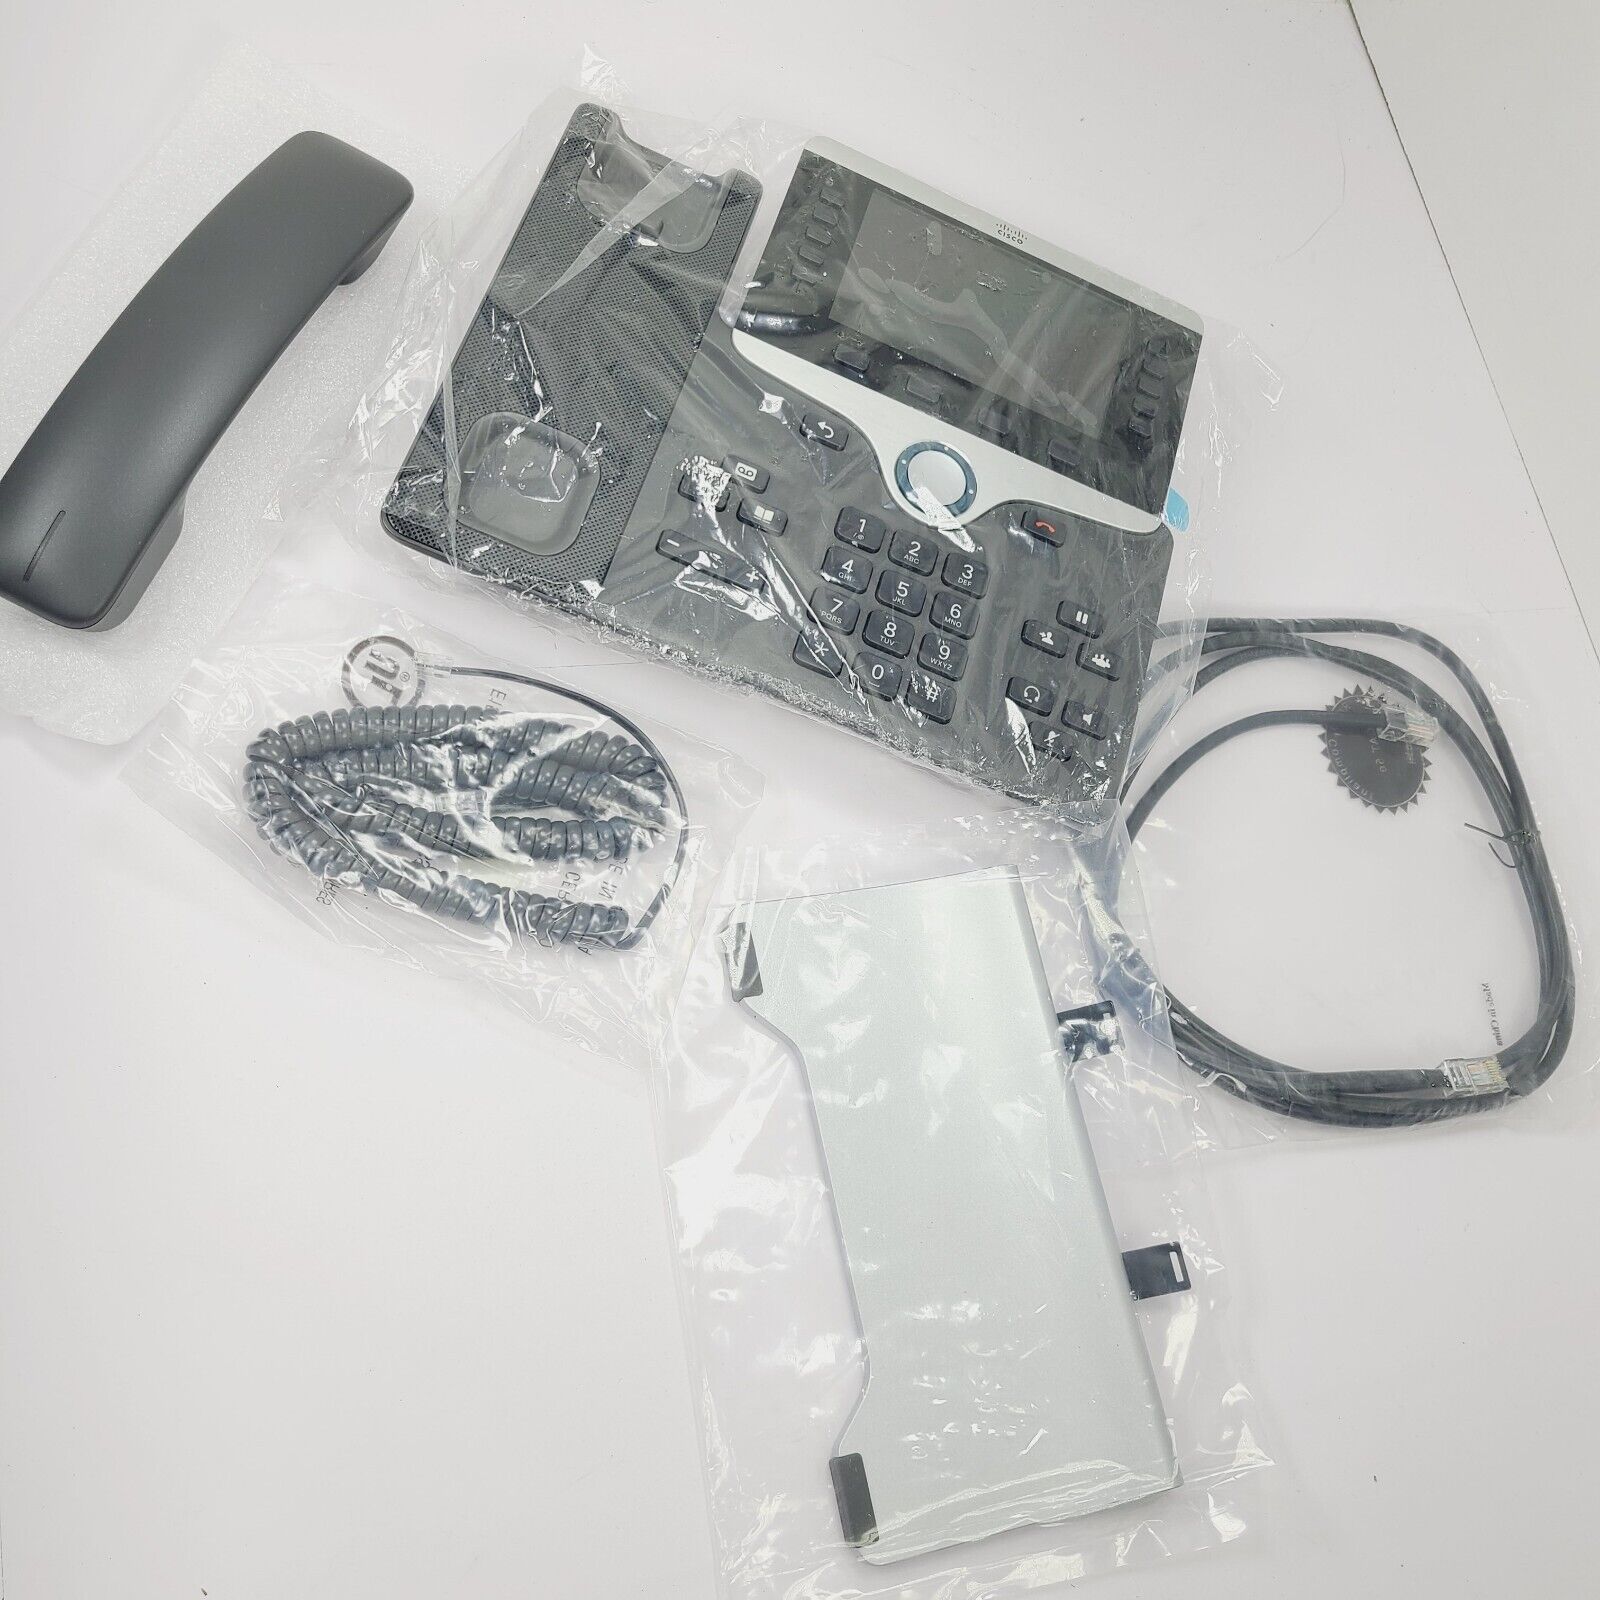 Cisco 8851 Phone (CP-8851) - New (Other) Disp Protector Attached - Unused In Box